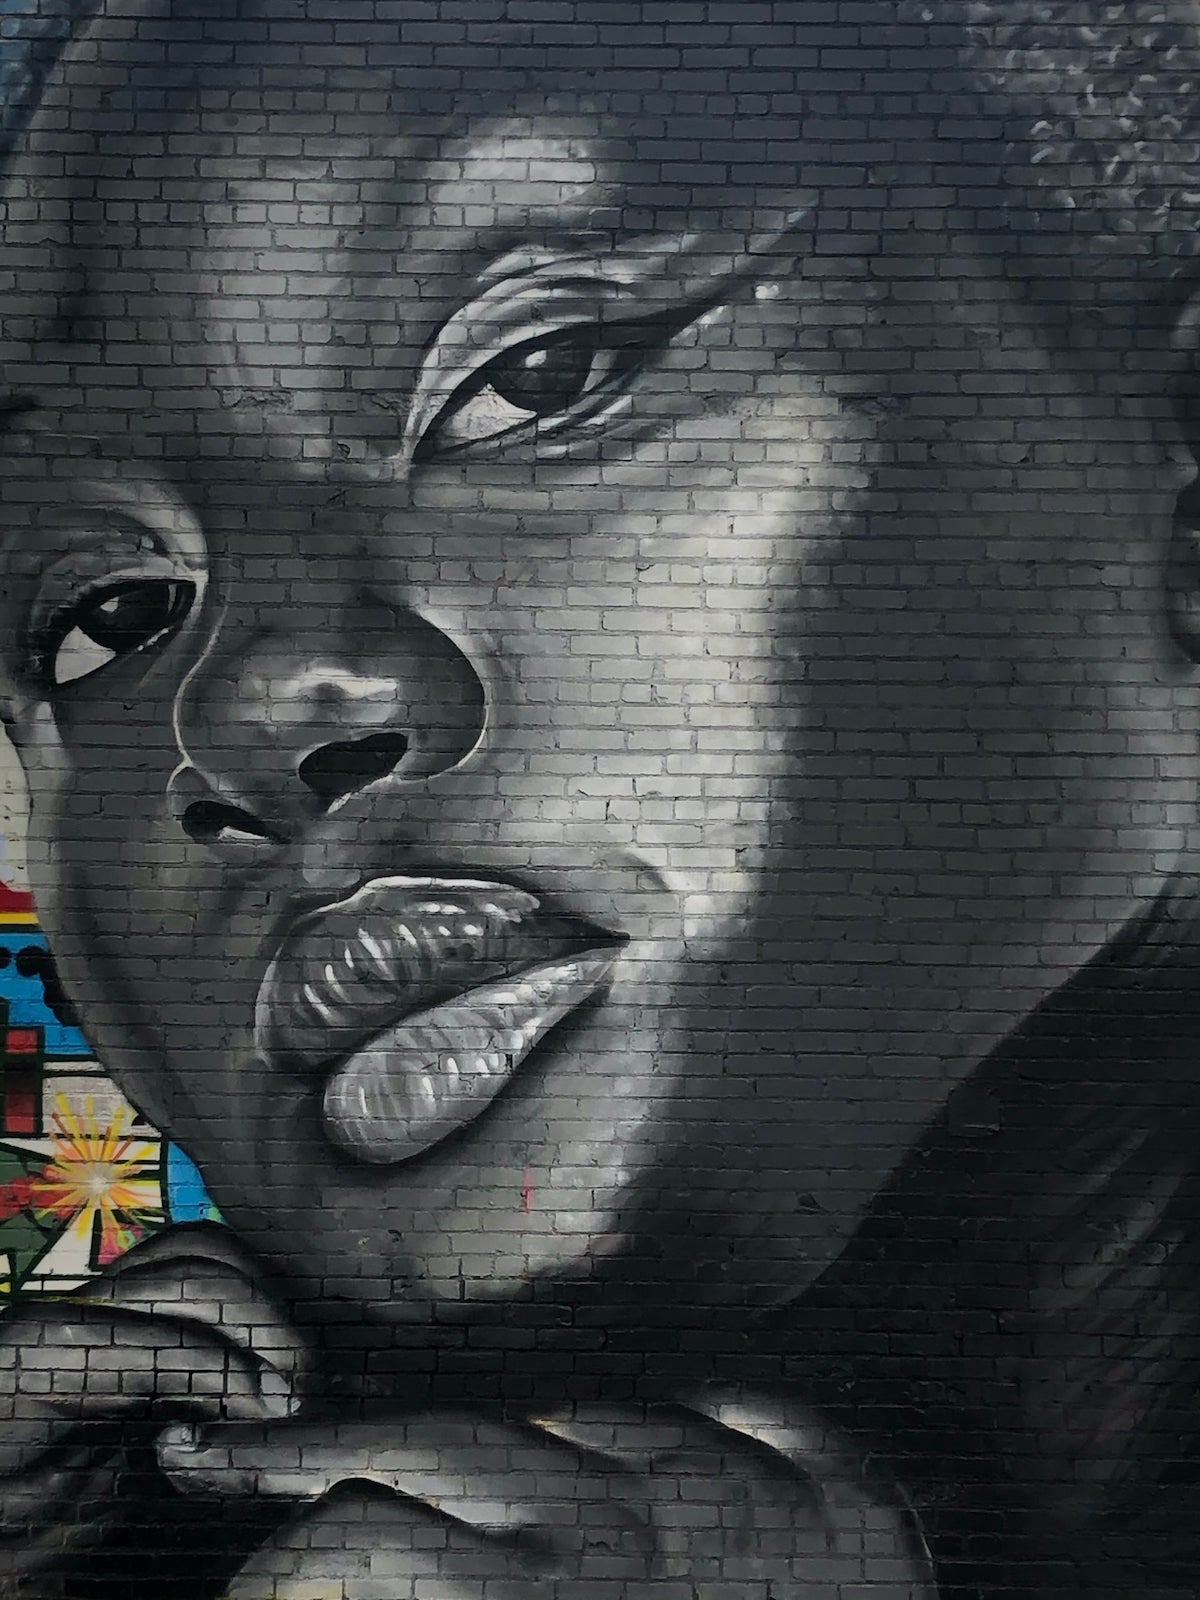 A mural of a black woman displayed on the side of a building